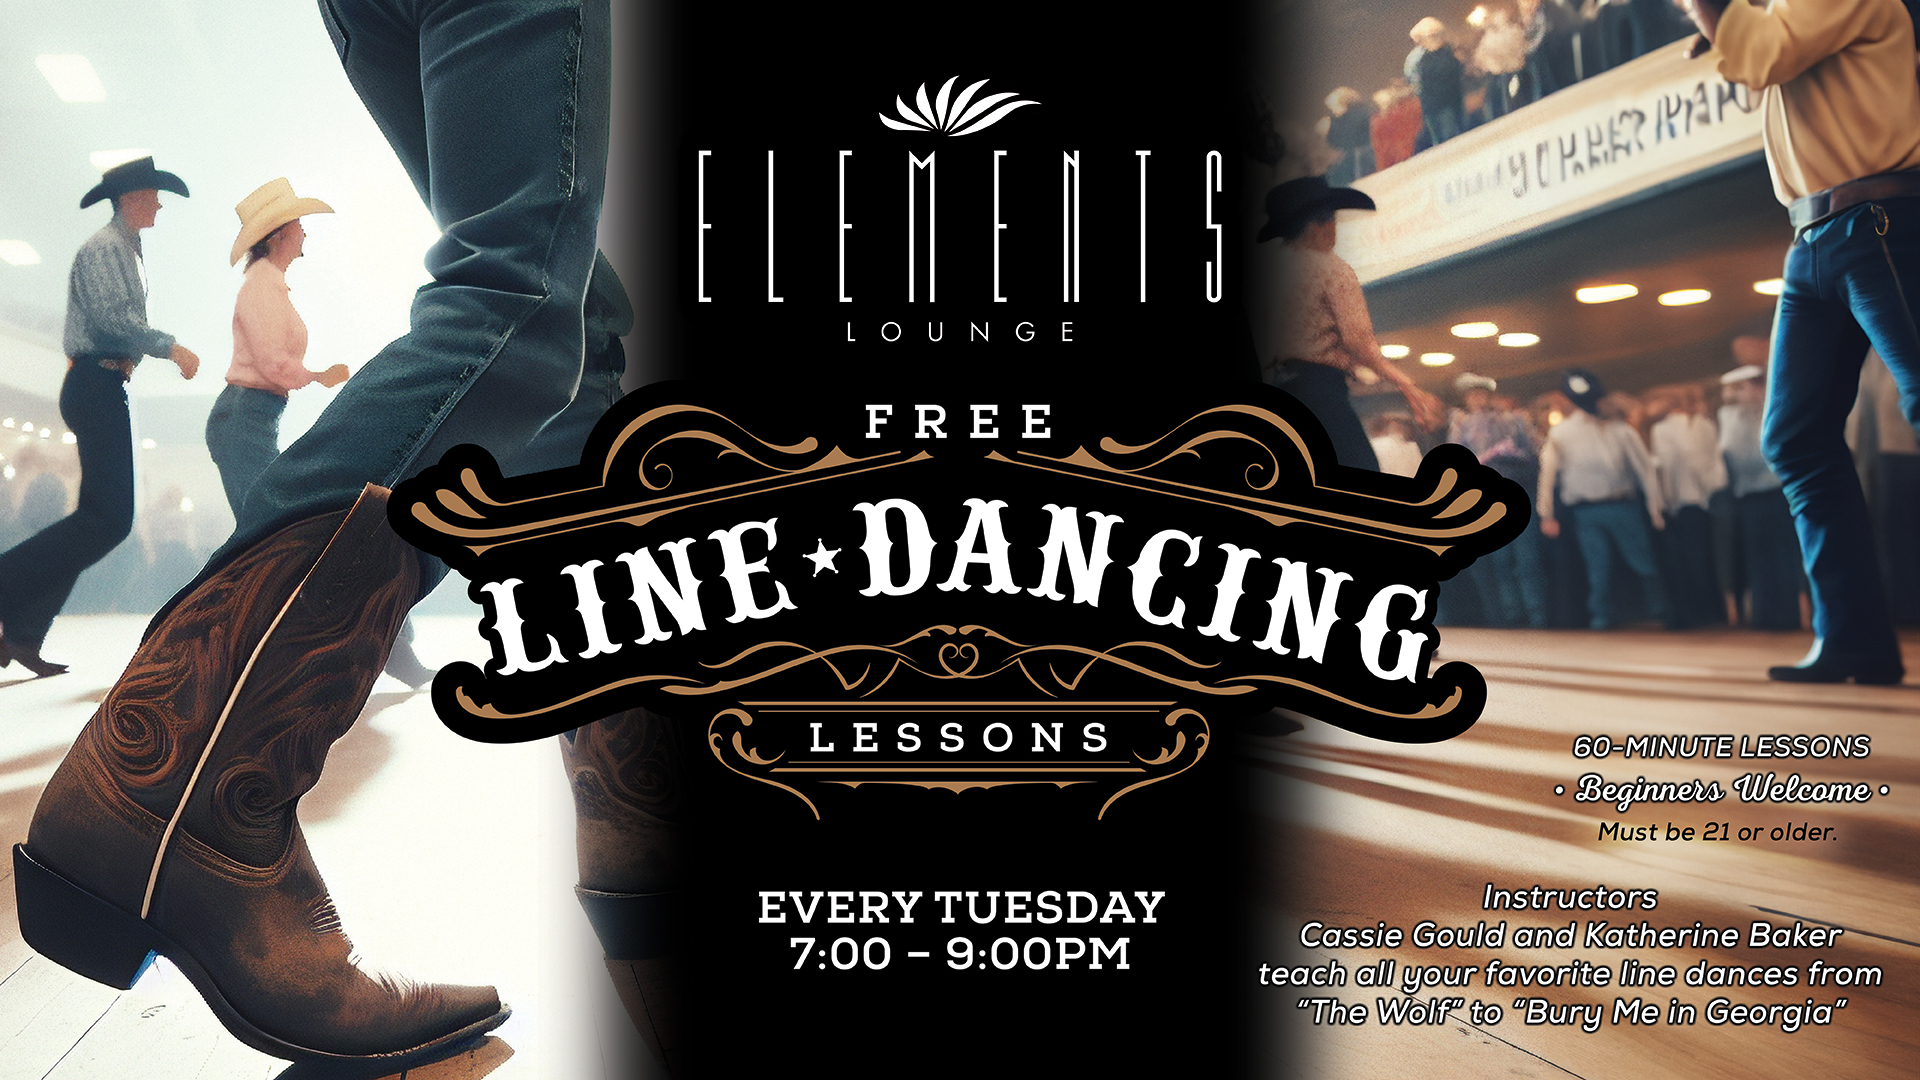 Seven Feathers Casino Resort Hosts Free Line Dancing In The Elements Lounge